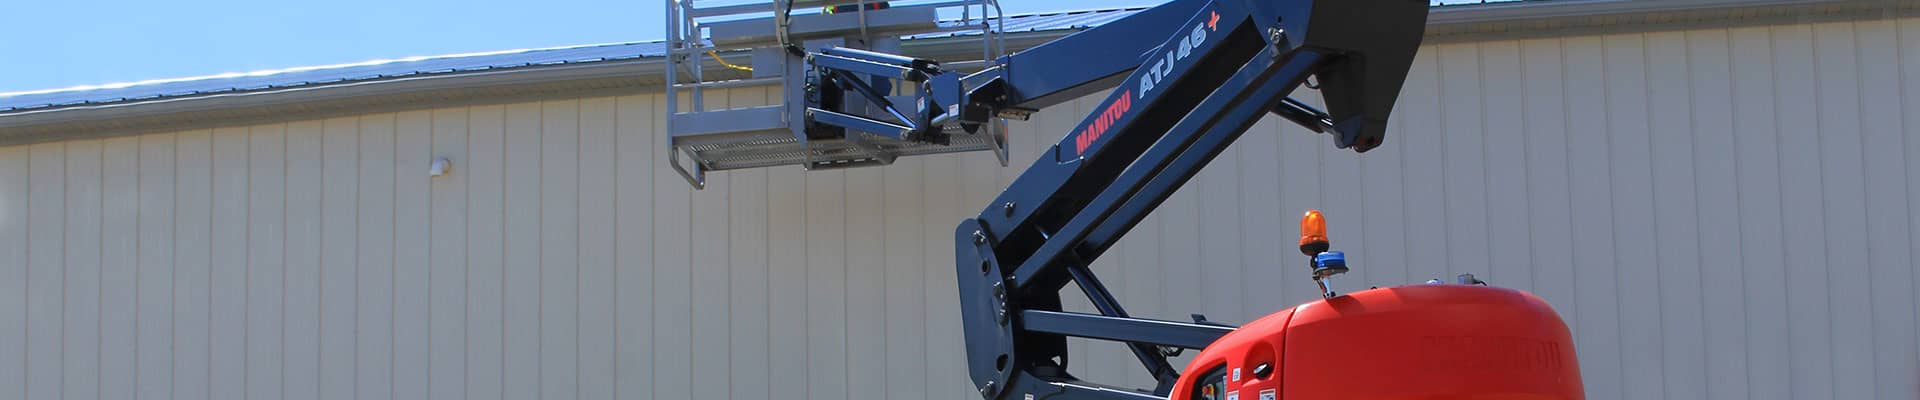 Articulating boom lift rental working in construction